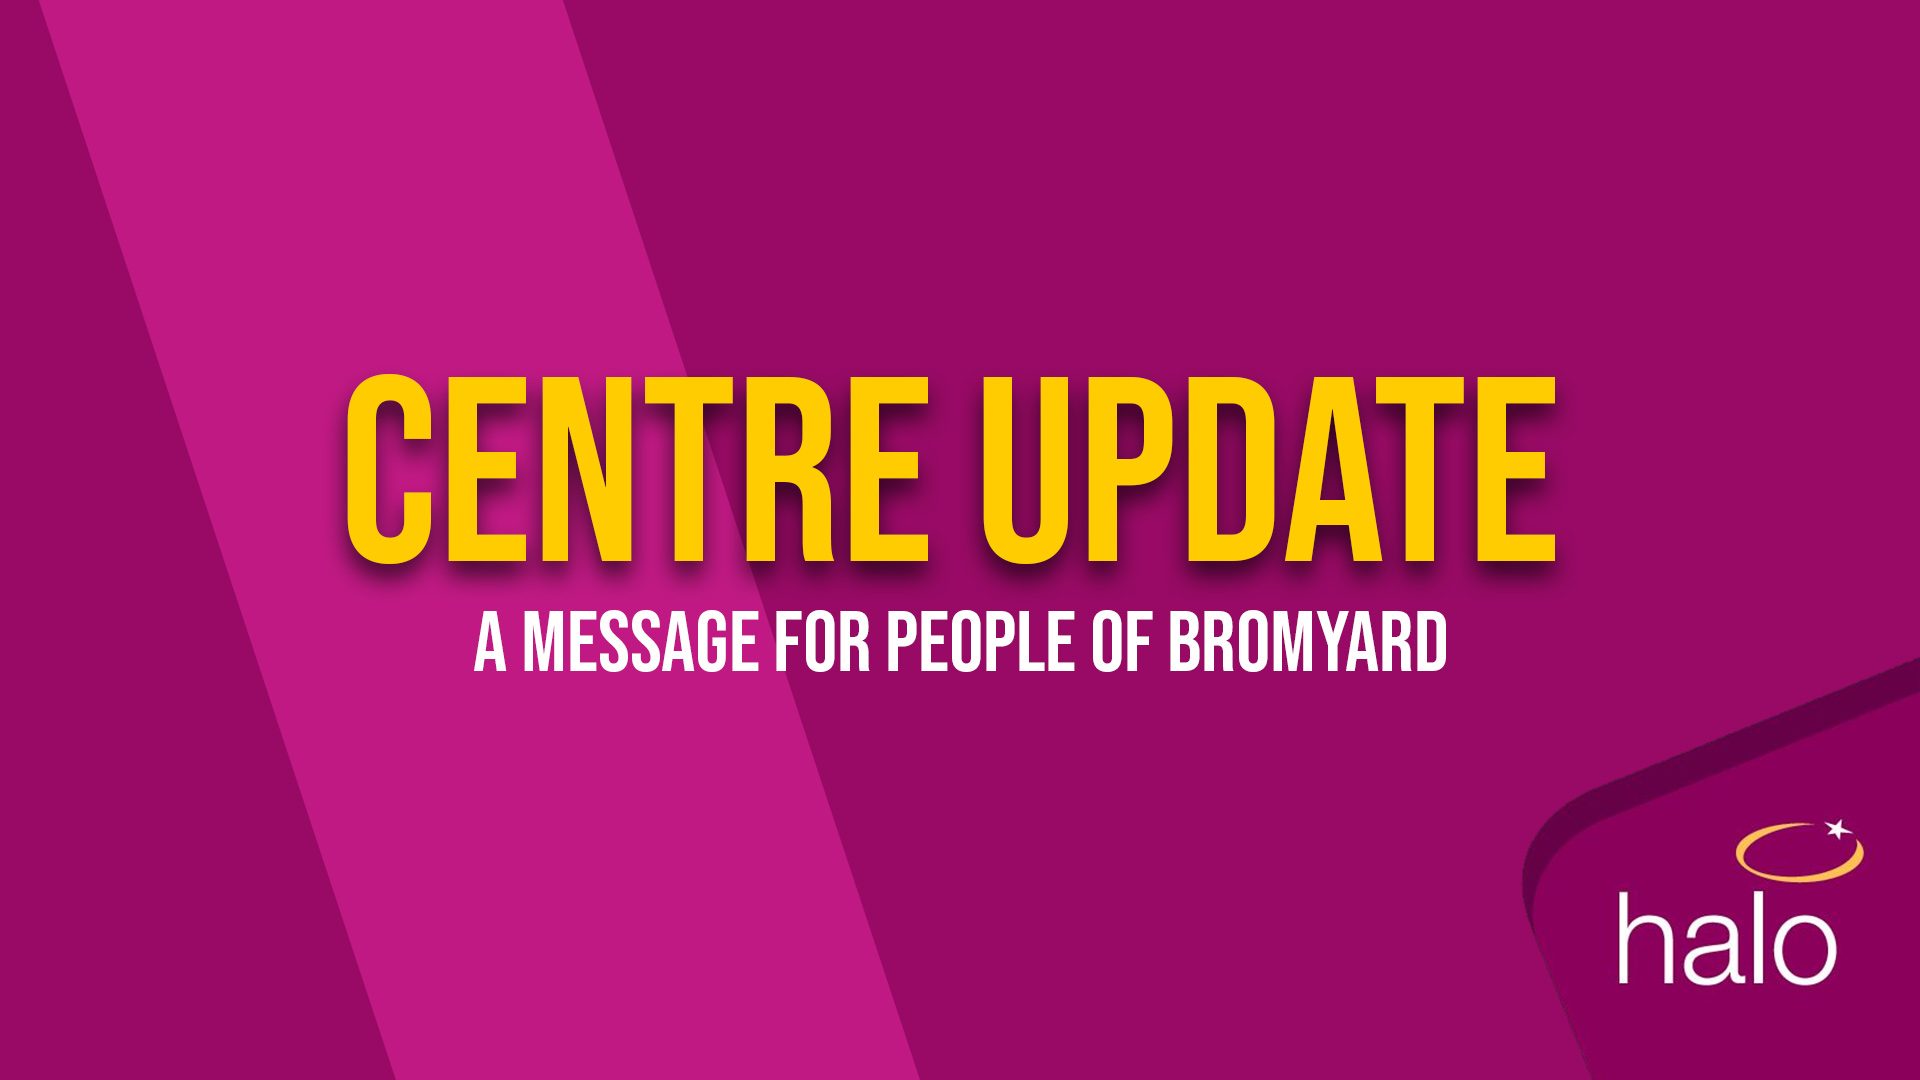 NEWS | Update on the repair work to The Bromyard Centre